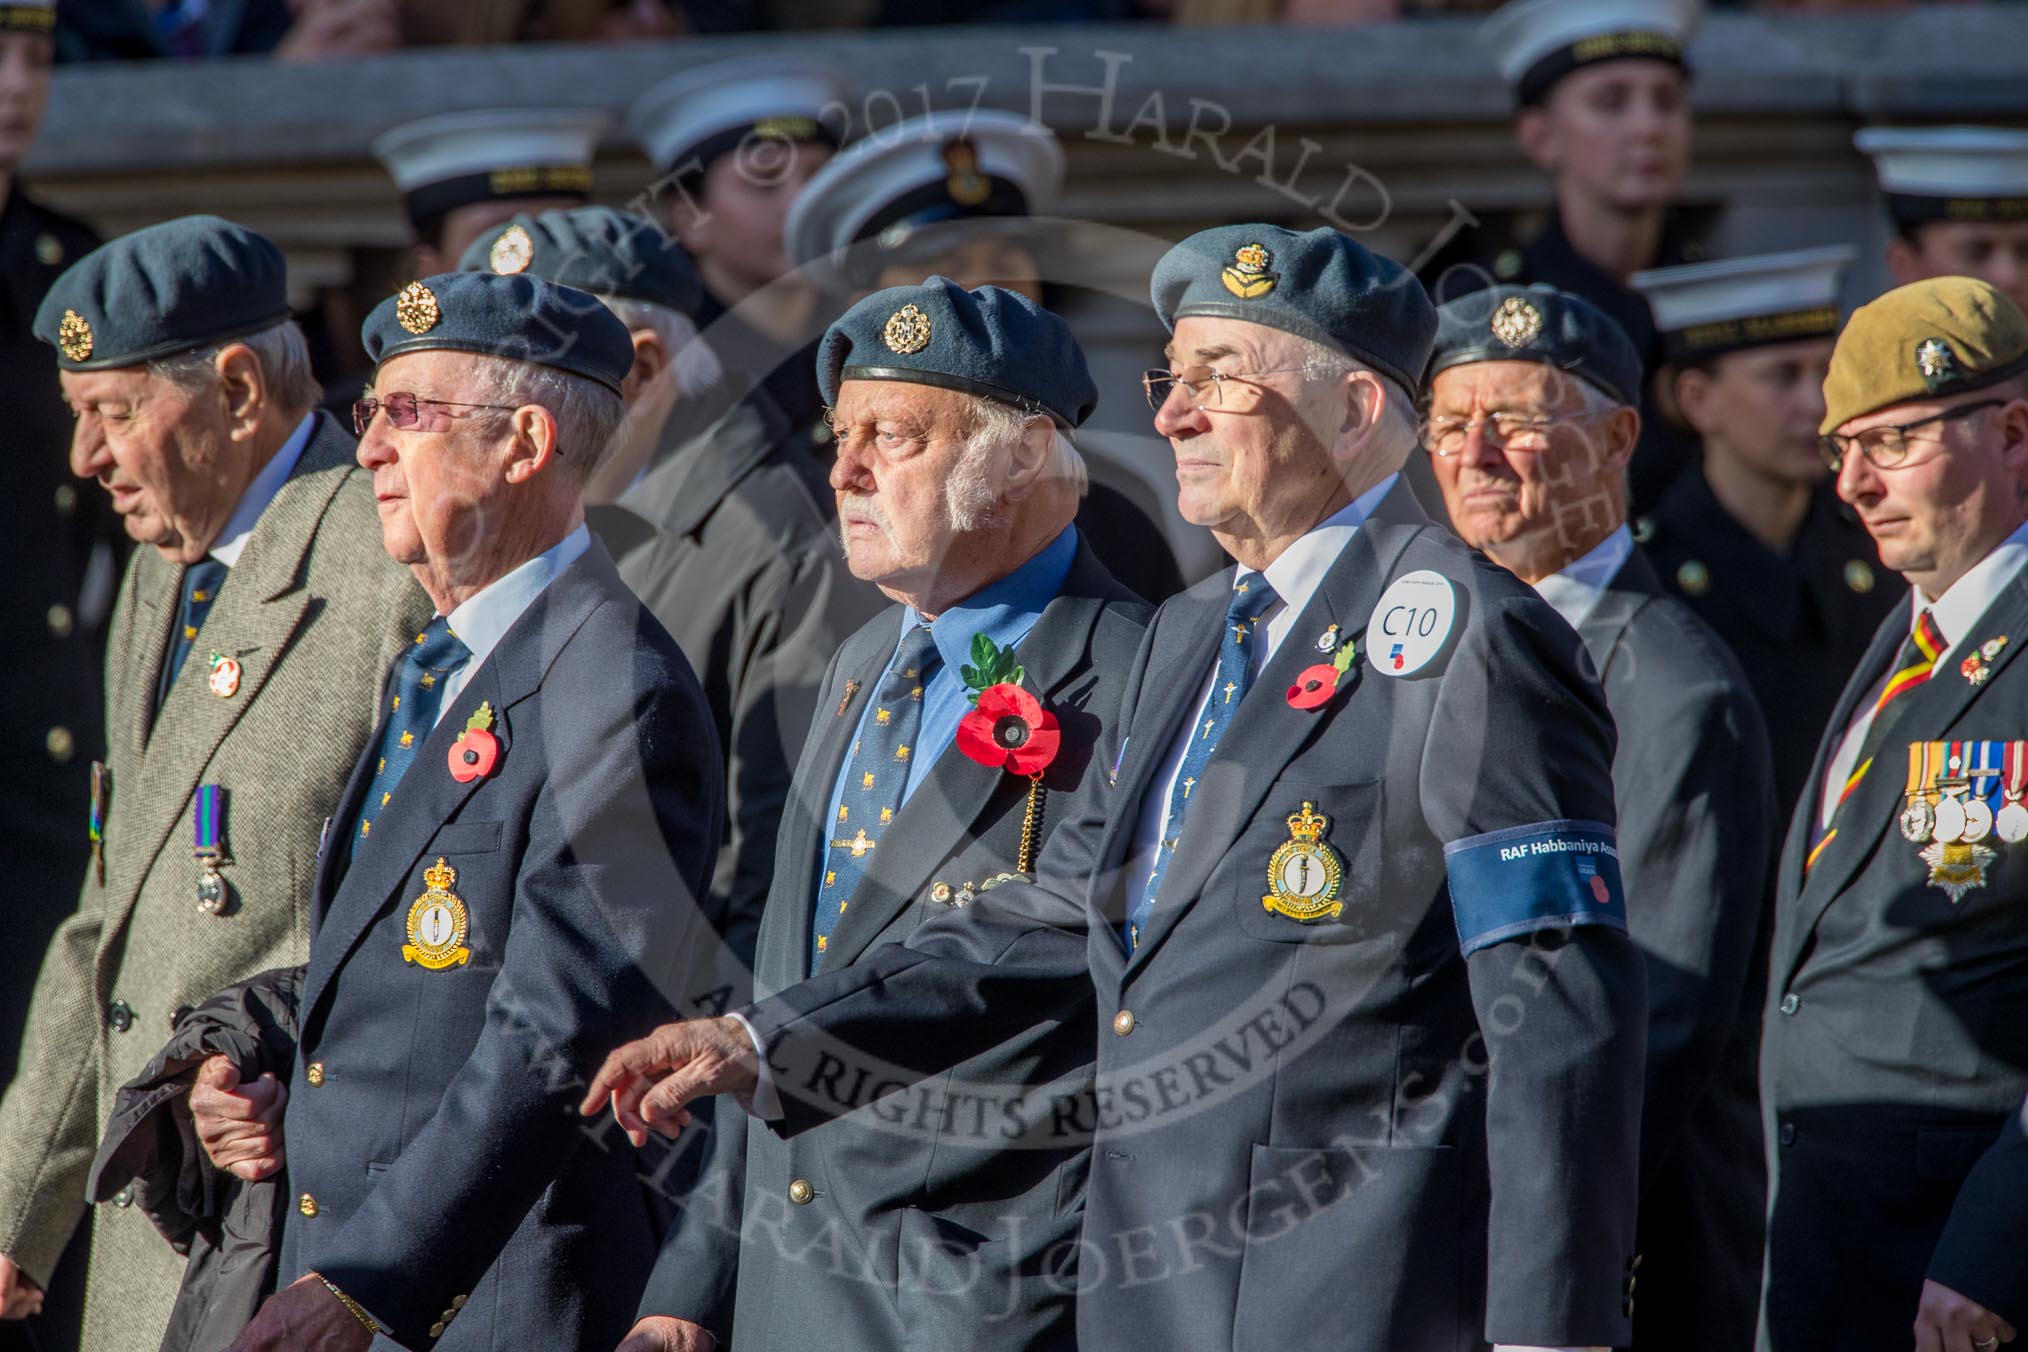 RAF Habbaniya Association (Group C10, 14 members) during the Royal British Legion March Past on Remembrance Sunday at the Cenotaph, Whitehall, Westminster, London, 11 November 2018, 12:16.